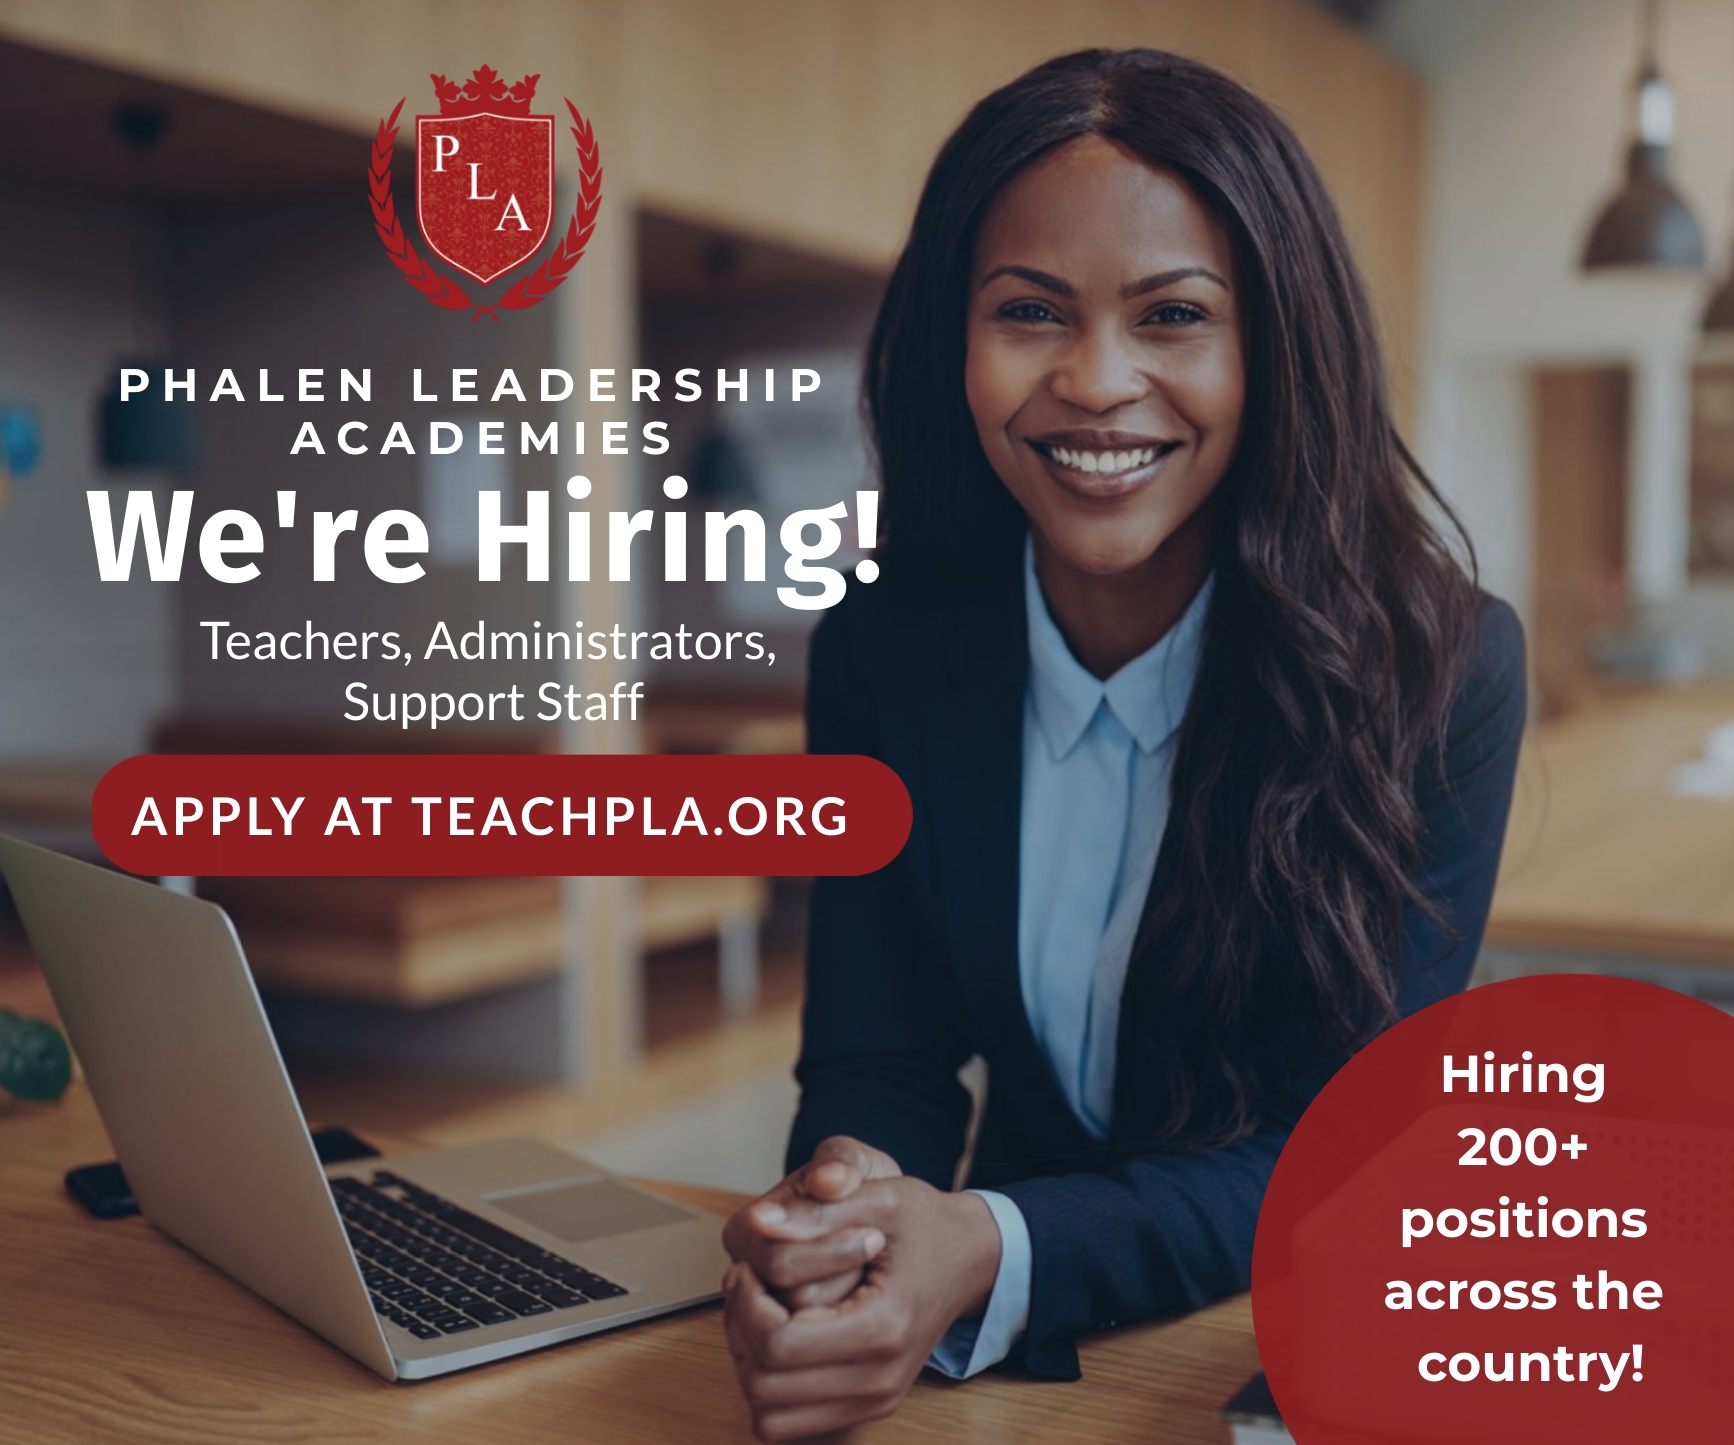 Phalen Leadership Academies is now hiring over 200 positions across the country. Apply today at TeachPLA.org.